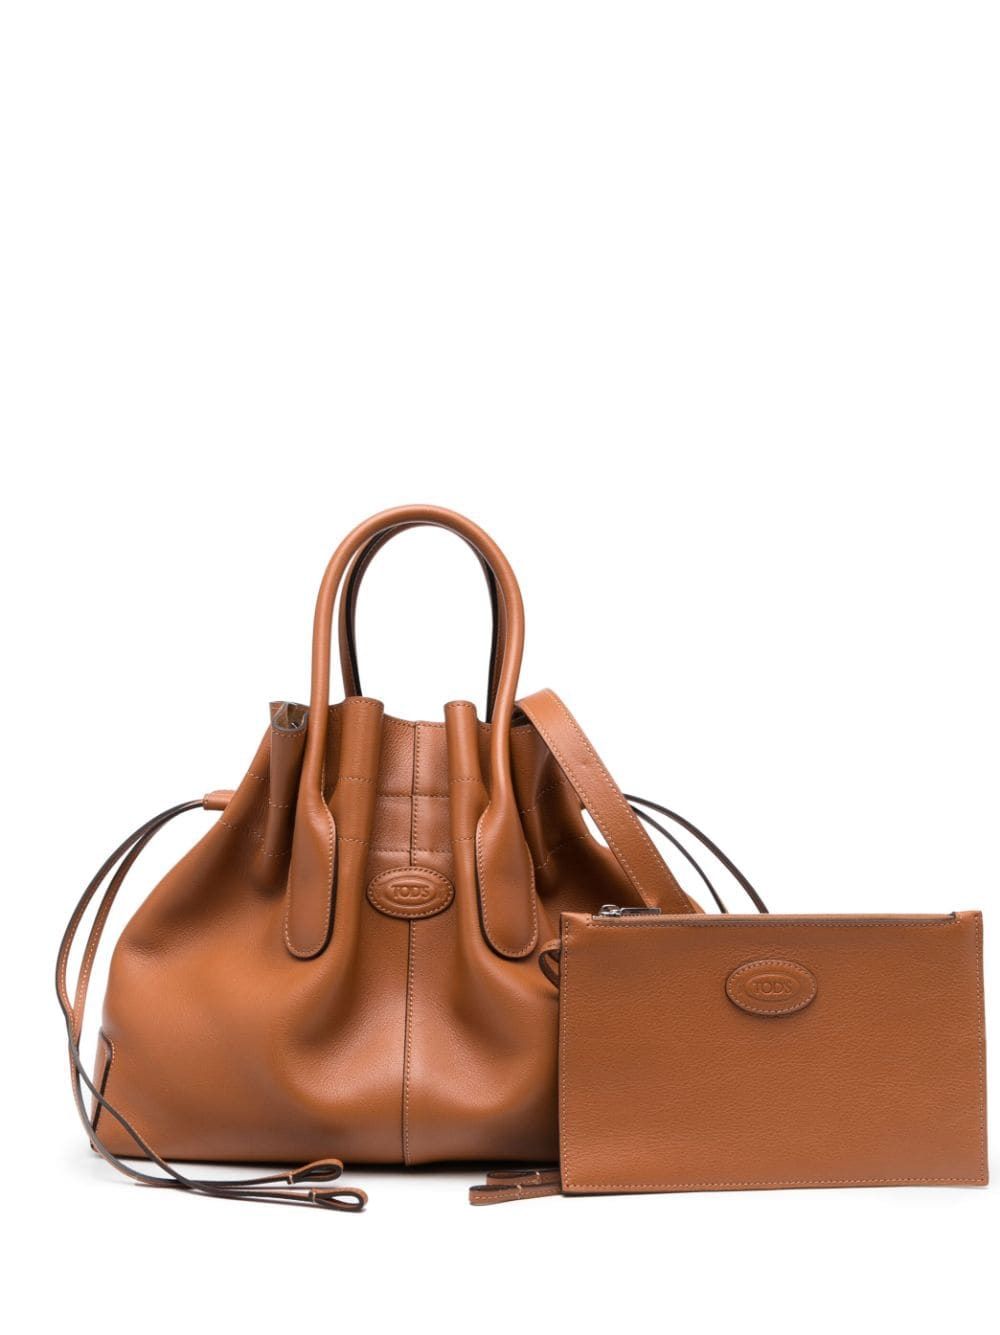 Club Style Calf Leather Bag for Women